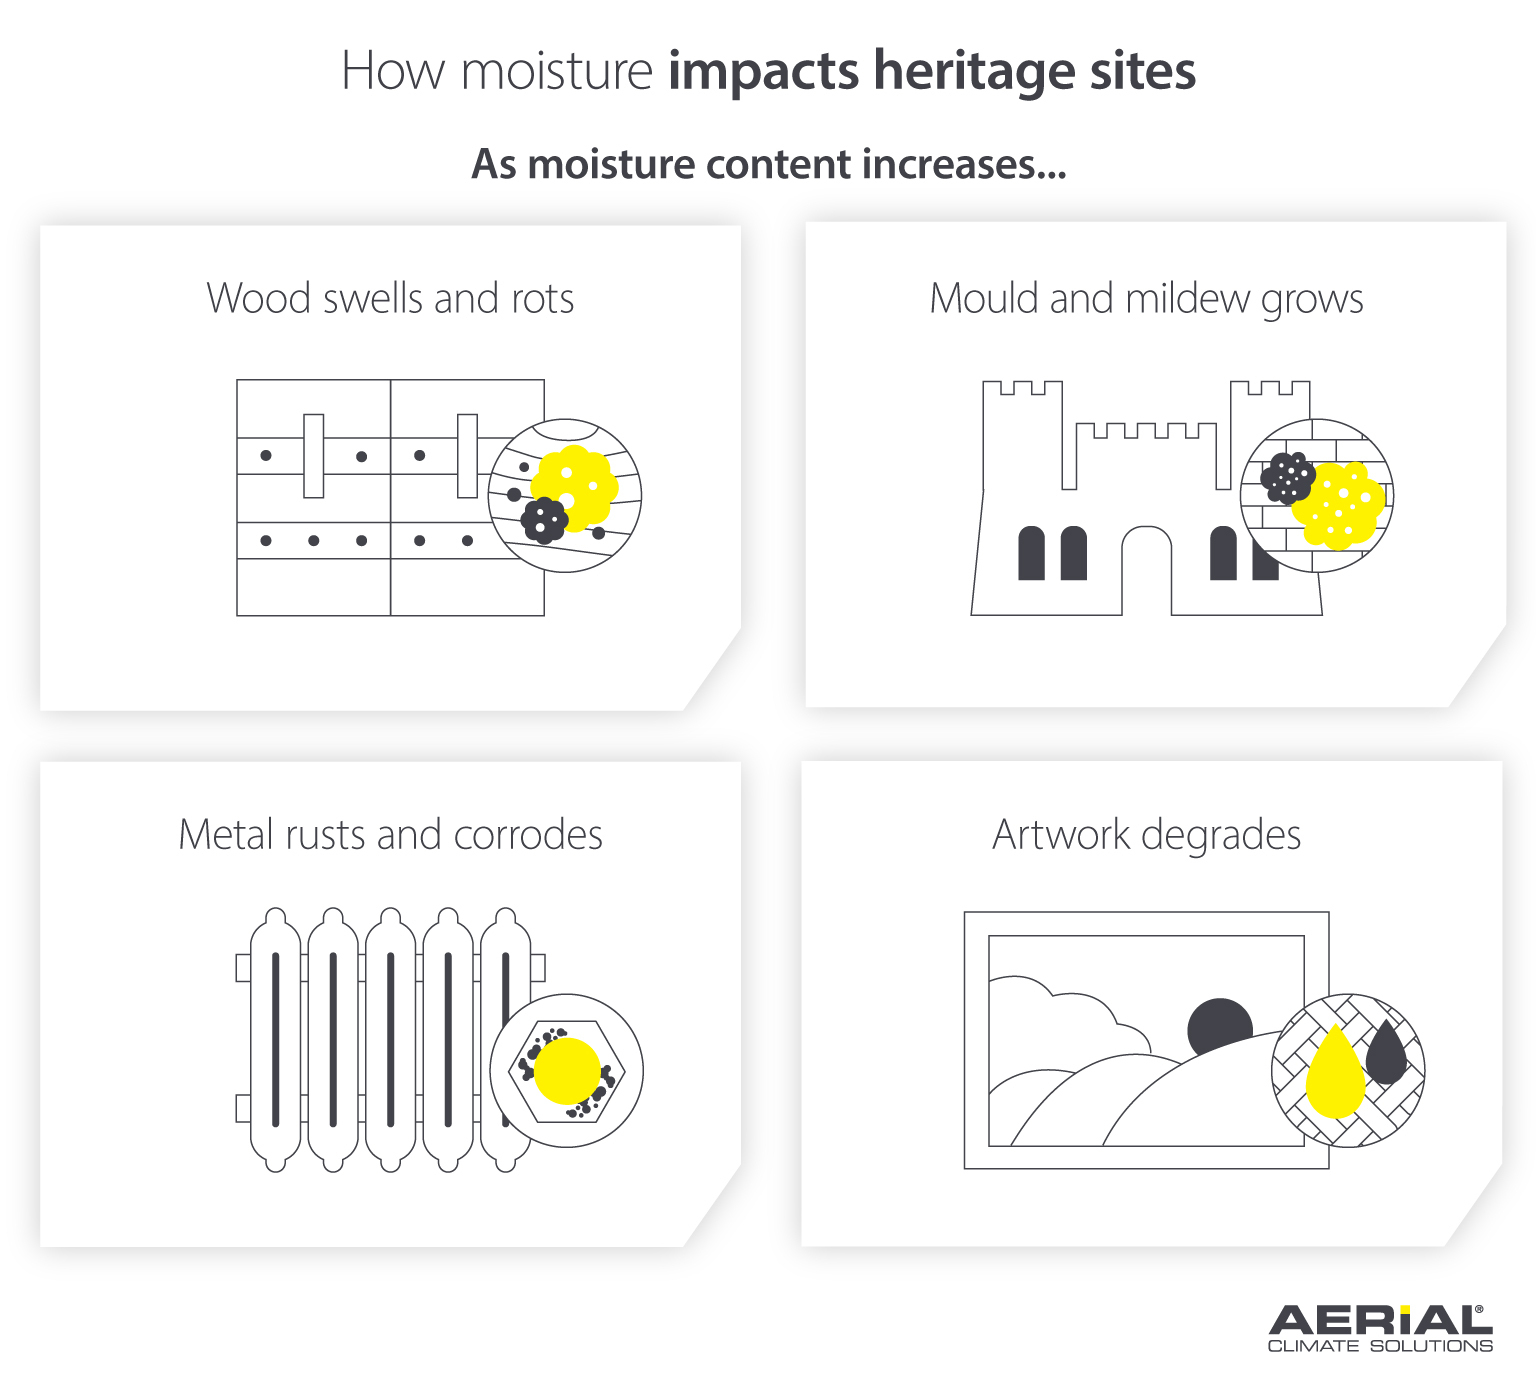 How excess moisture in the air impacts heritage sites and contents - Infographic image